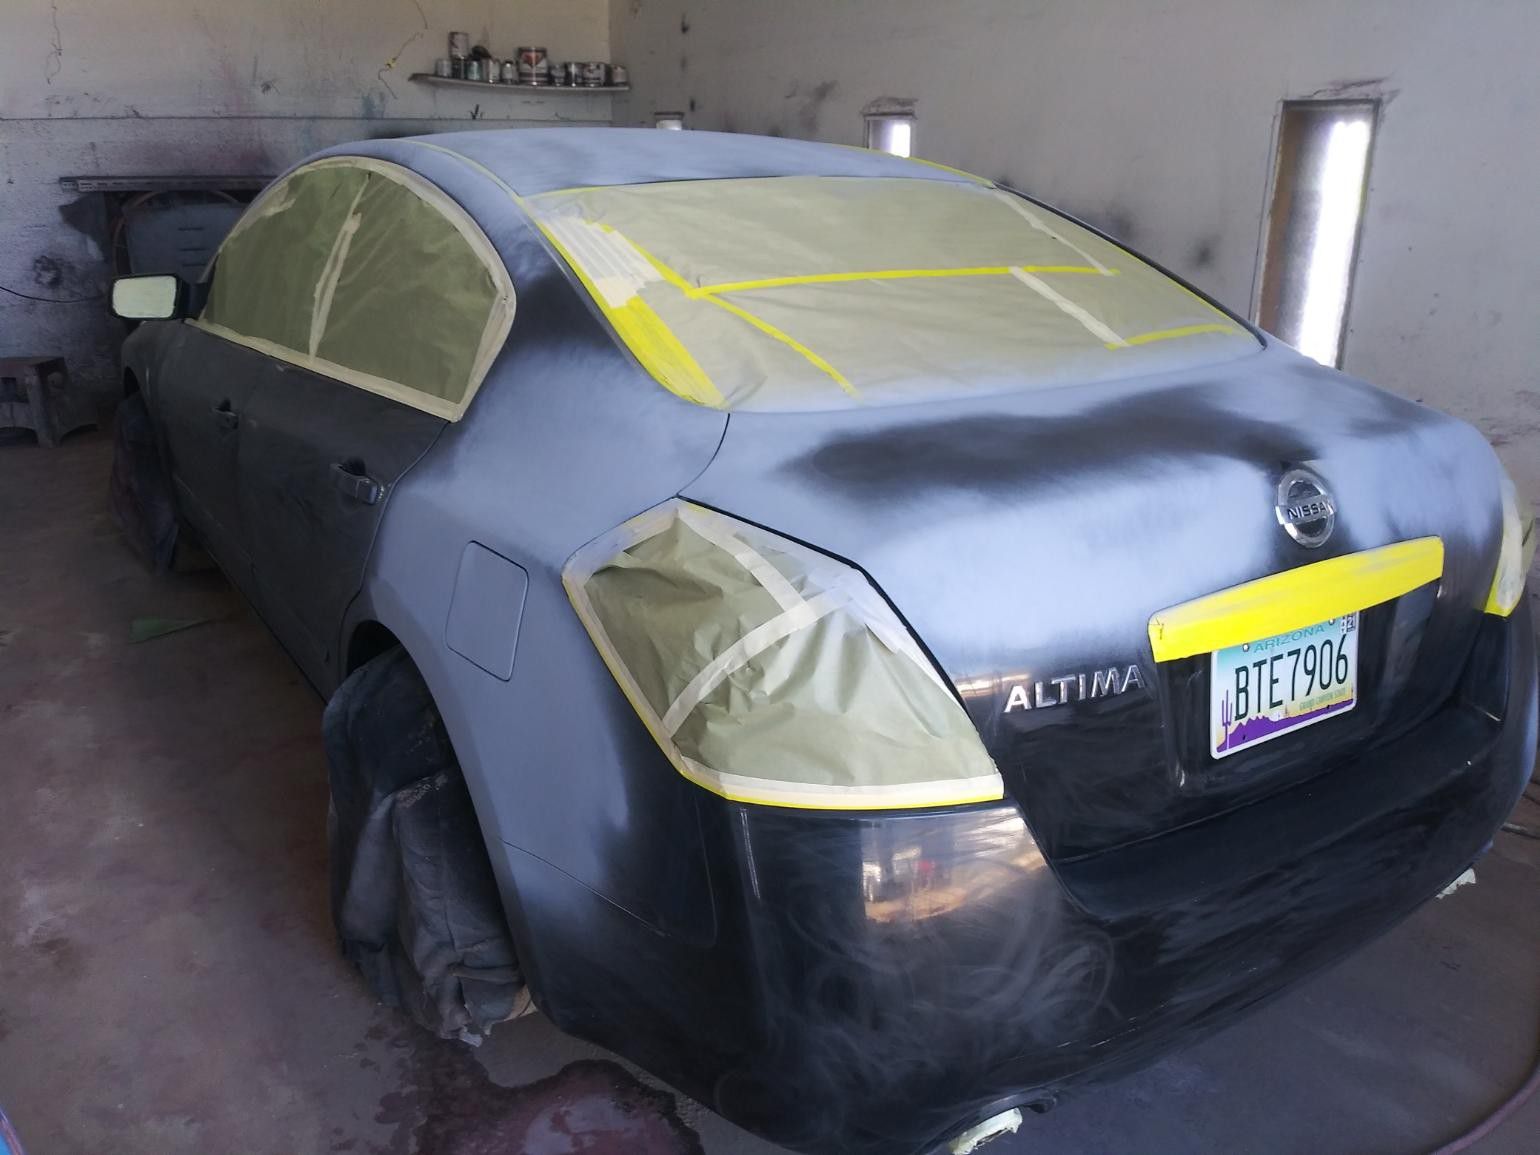 Body work and paint